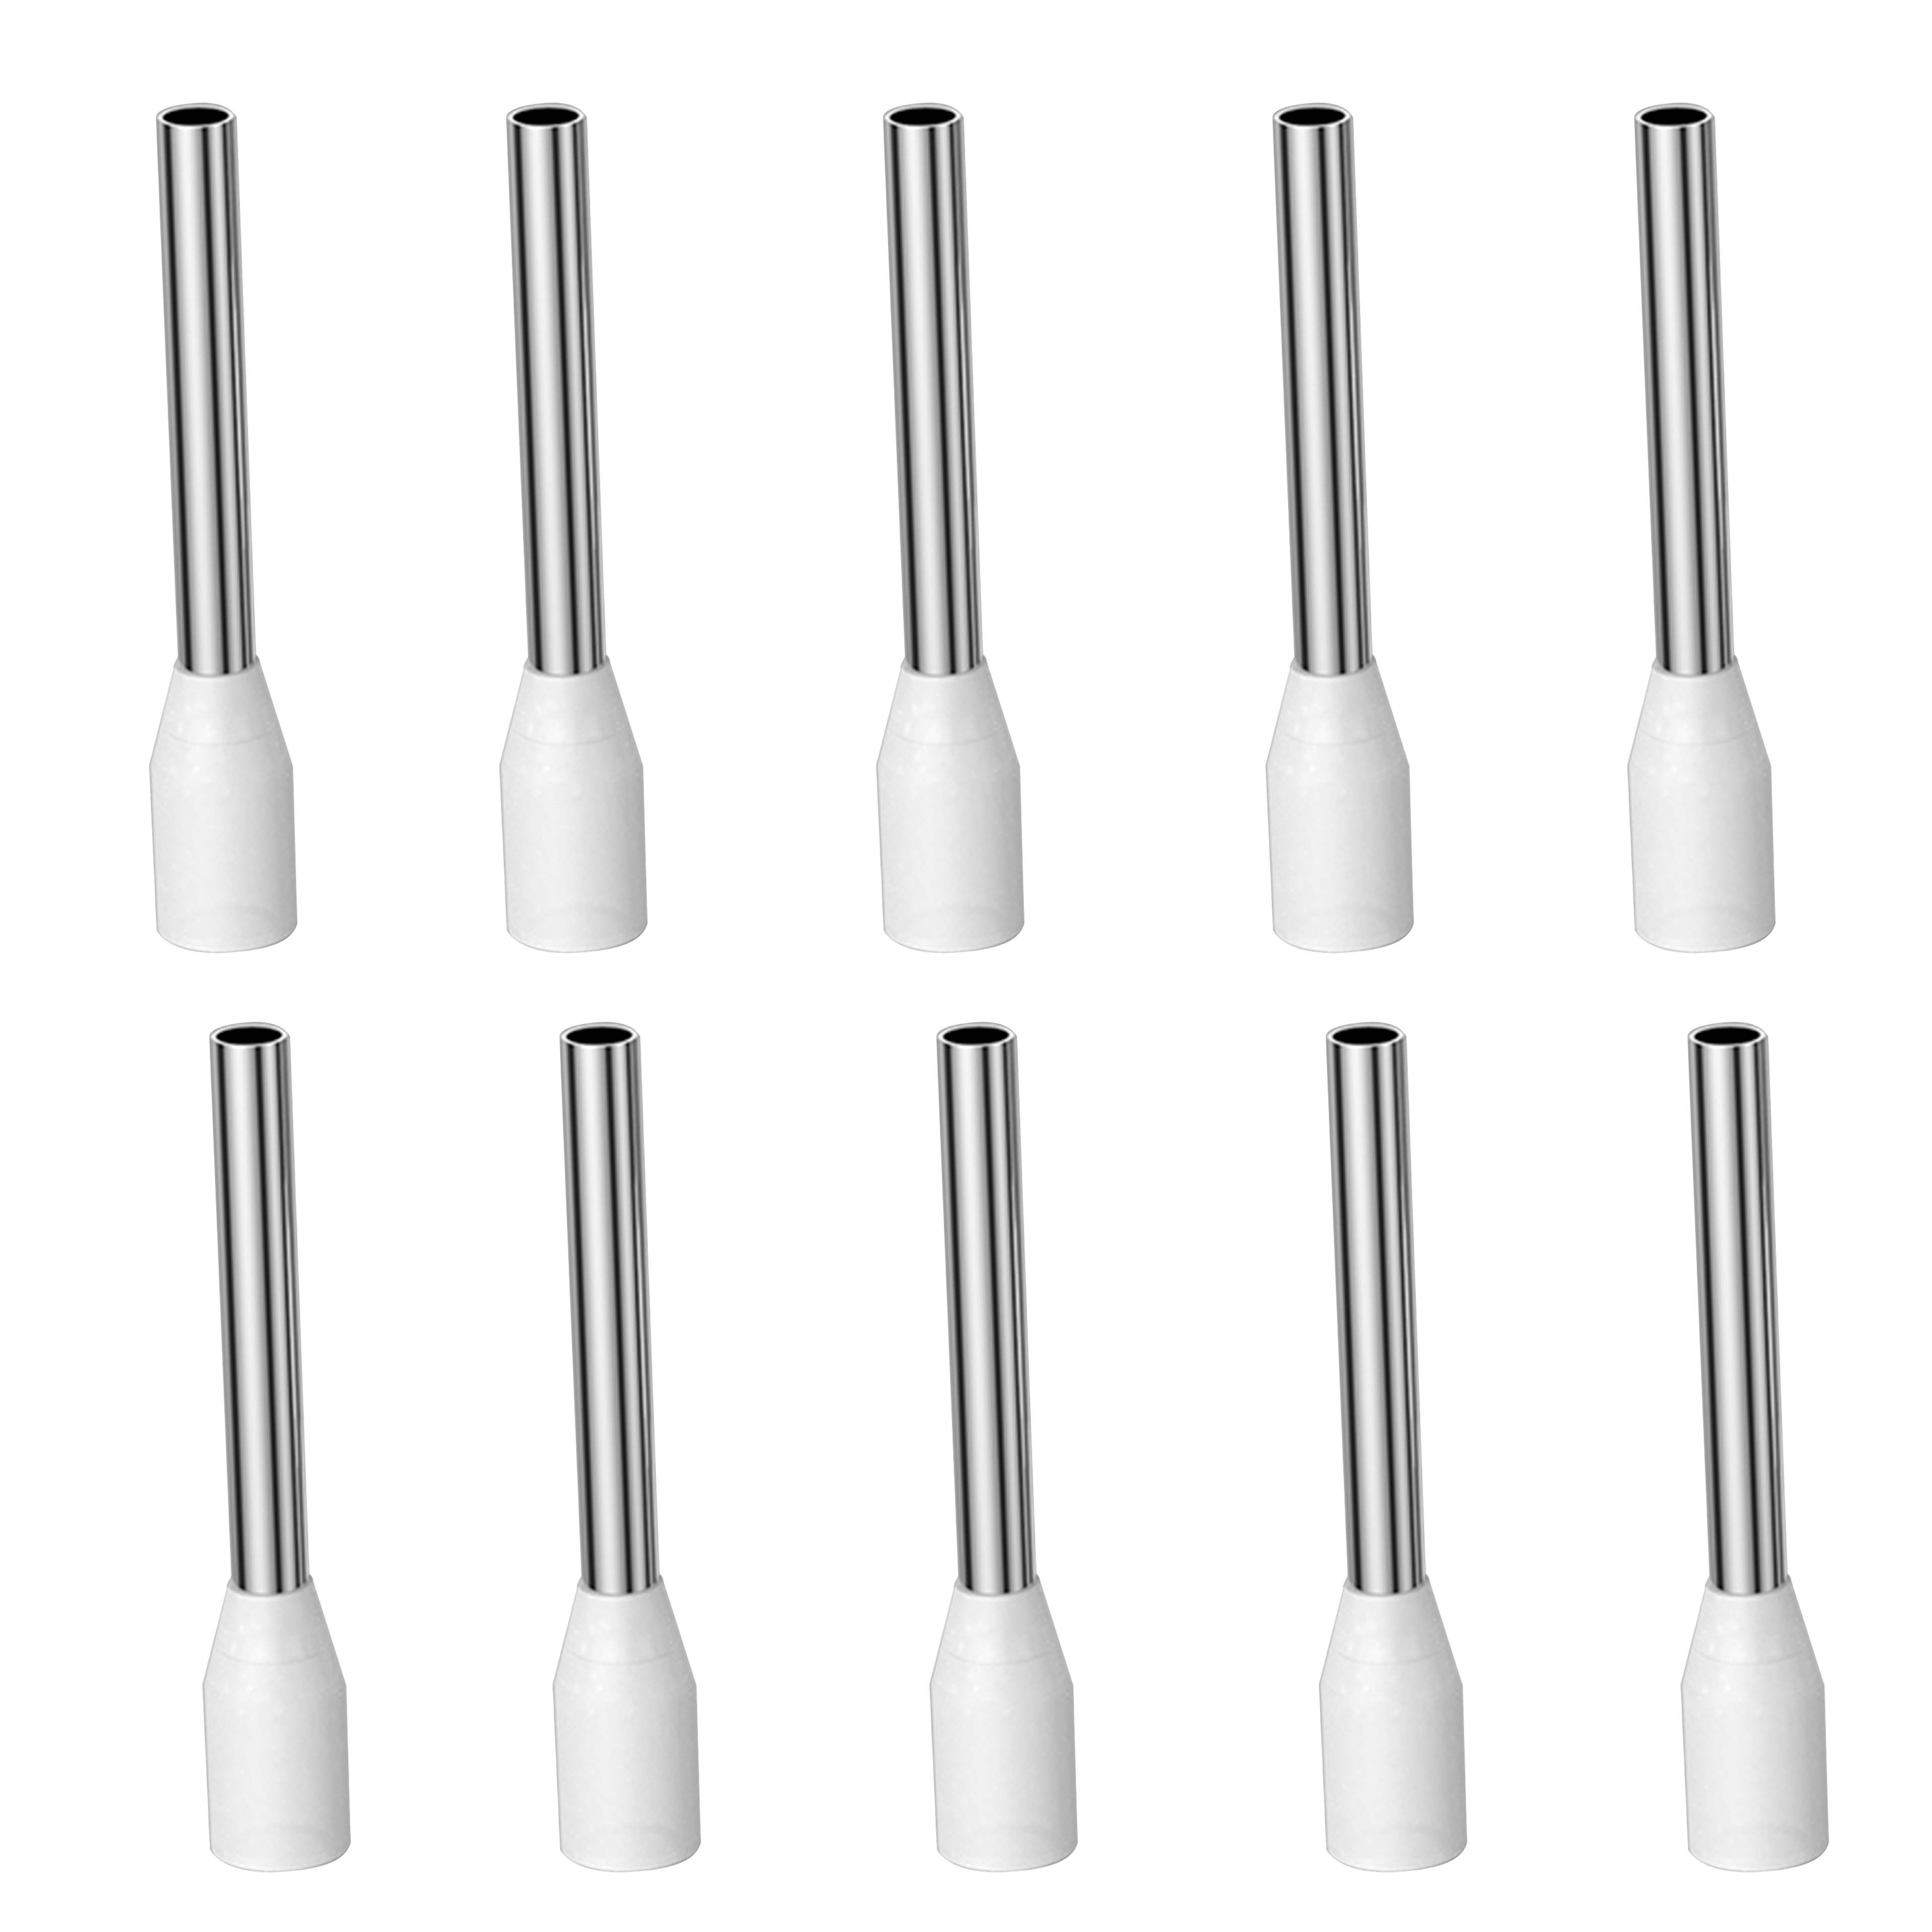 VIBORG VB2518R Cable Crimping Tips with Insulation OFC / Silver / Rhodium Plated Copper 2.5mm² (Set x10)